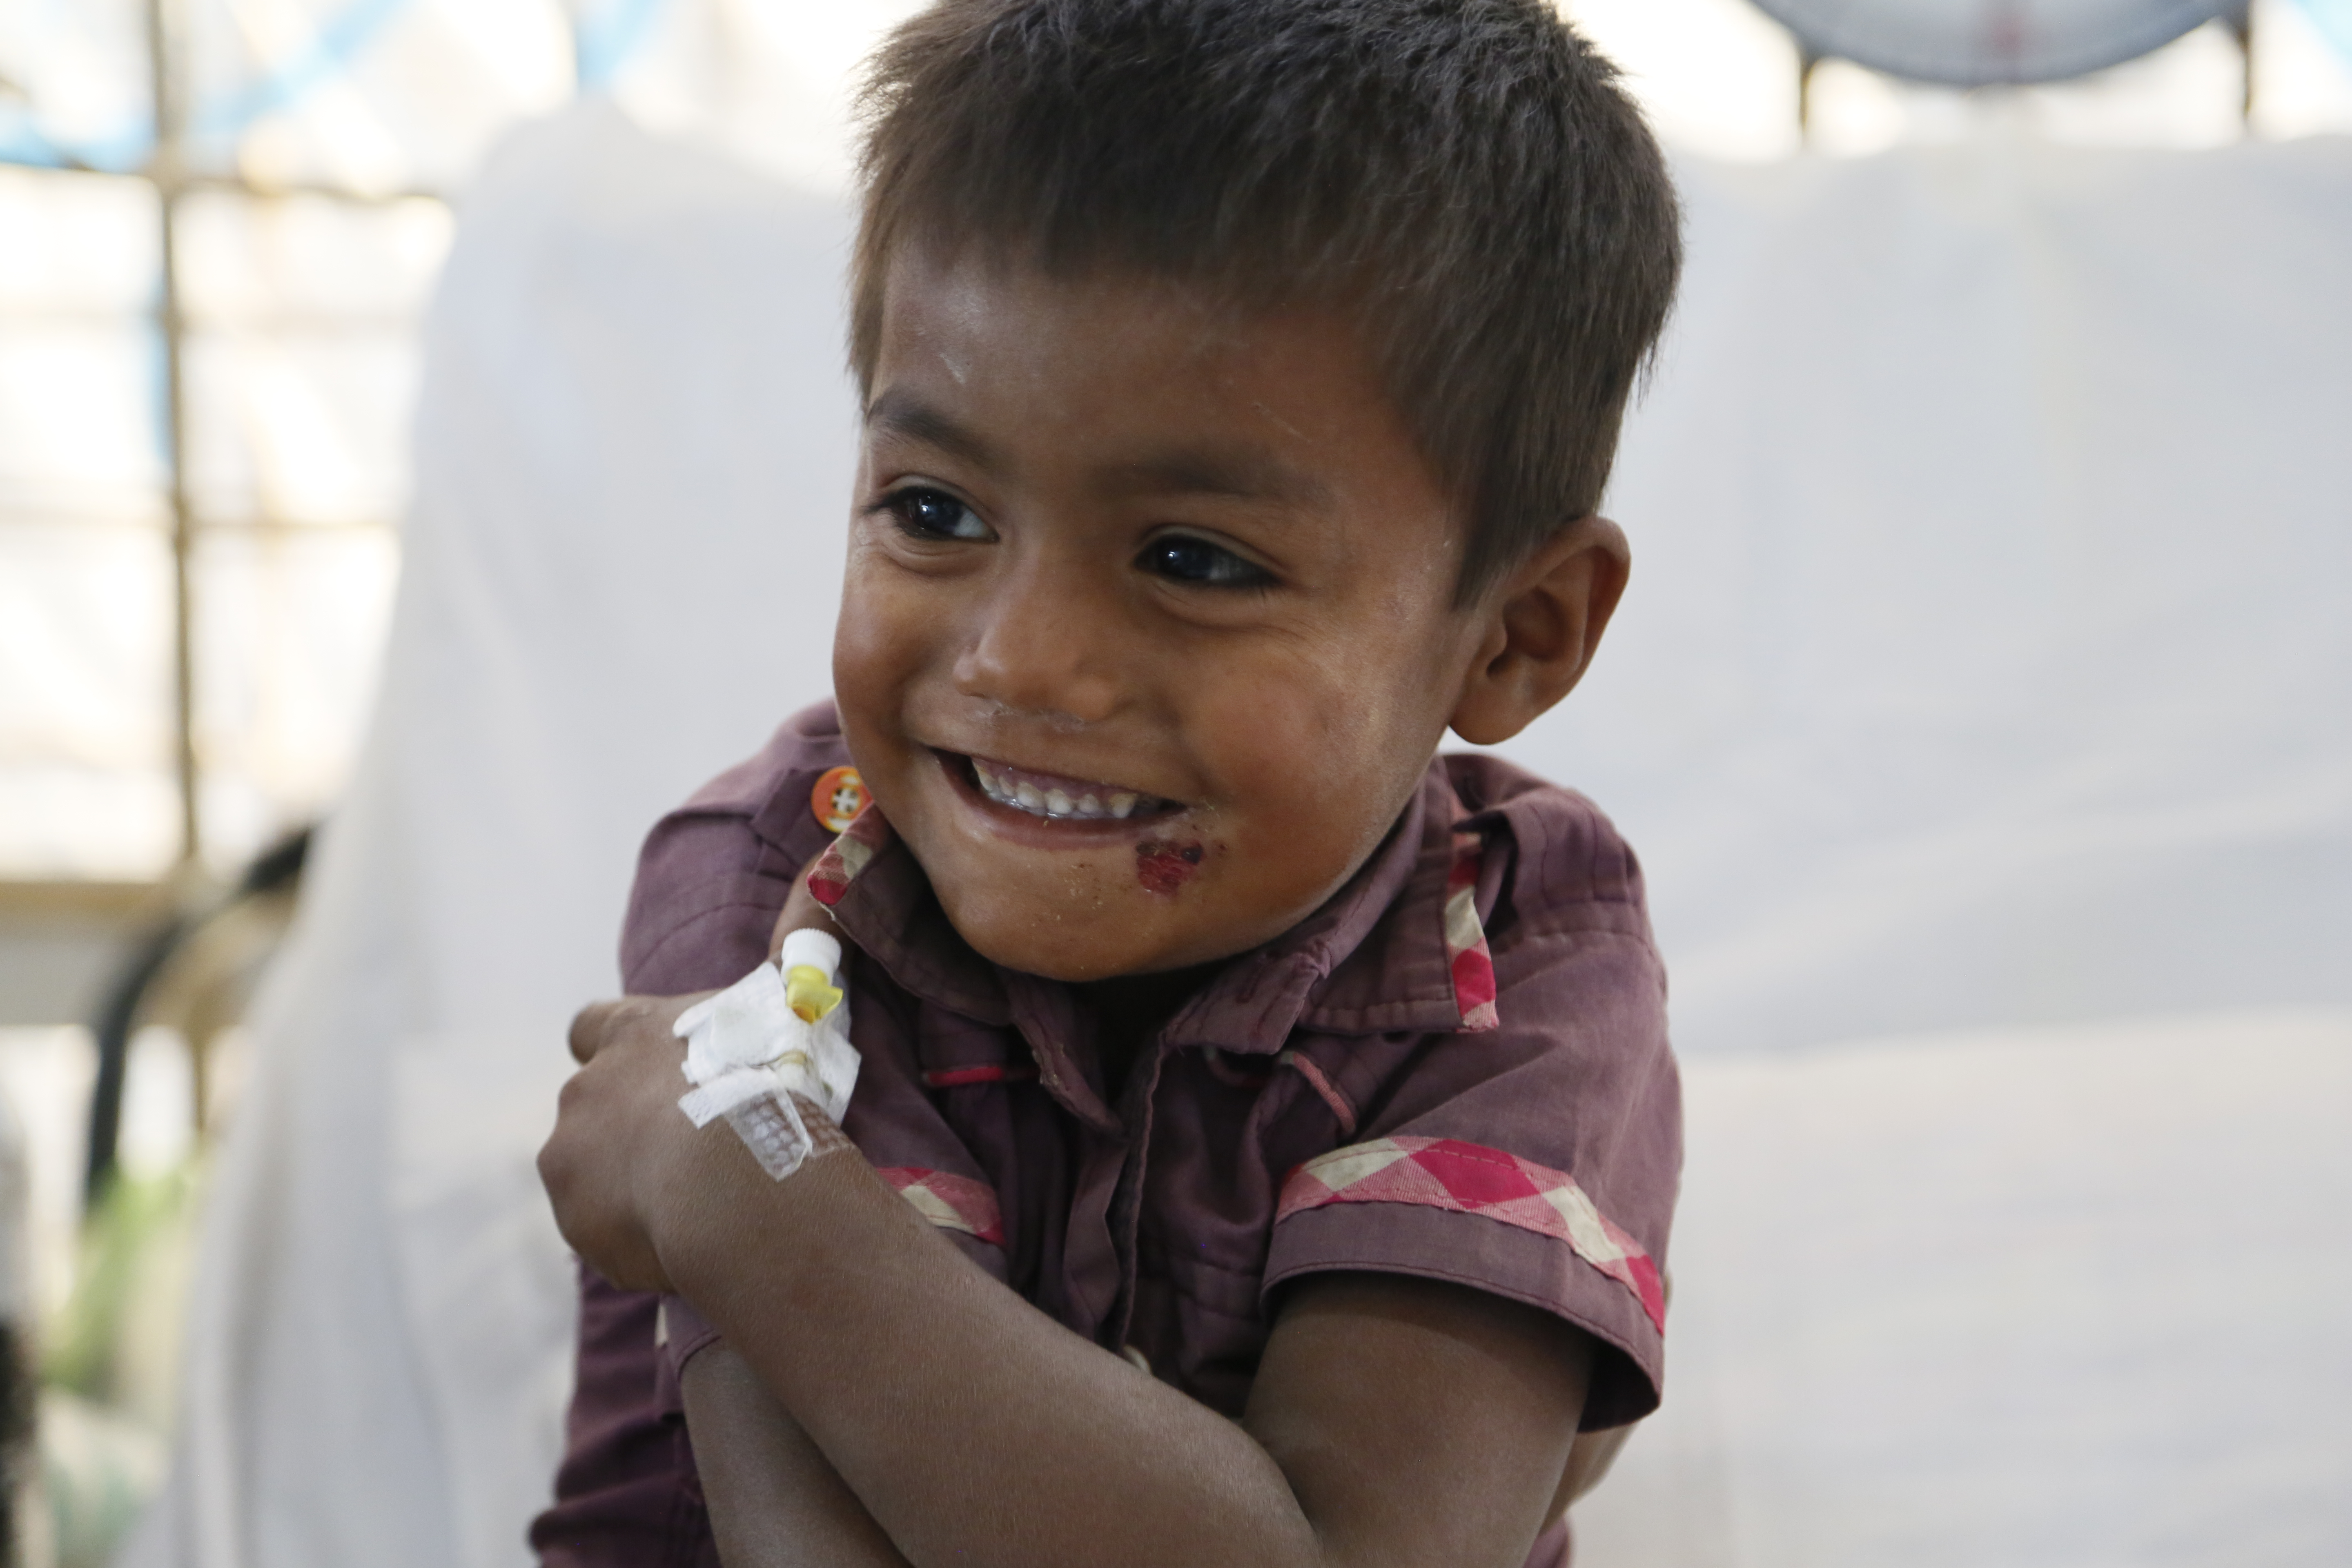 4-year-old_Rohingya_boy_Anowar,_after_being_treated_for_diphtheria_by_the_UK's_Emergency_Medical_Team_in_Kutupalong,_Bangladesh_M4A2575_(38921115865).jpg